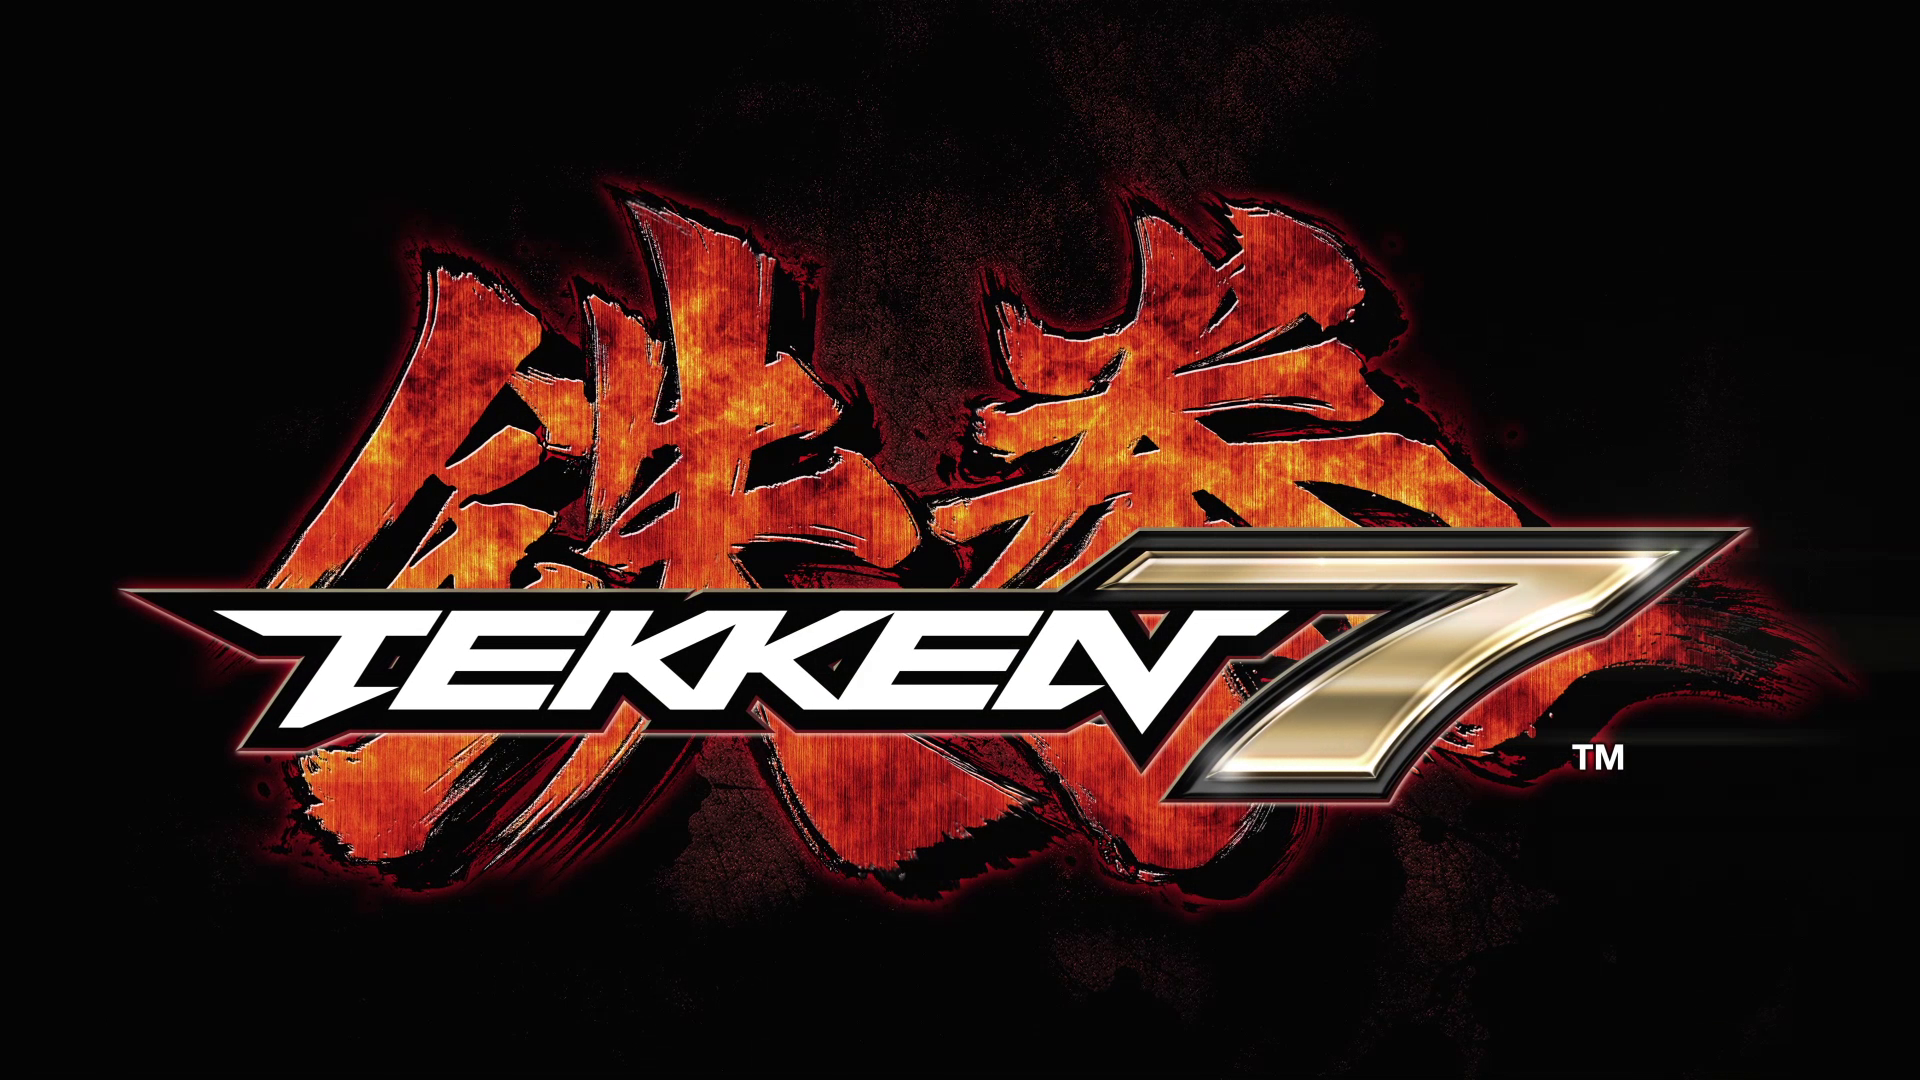 Bandai Namco is now developing the ninth installment in the Tekken franchise, and it will reportedly come in Playstation 4 and Xbox One consoles. However, its release date is still unknown. Some gamers claim that Bandai Namco will announce its launching in the next PSX (PlayStation Experience) event.